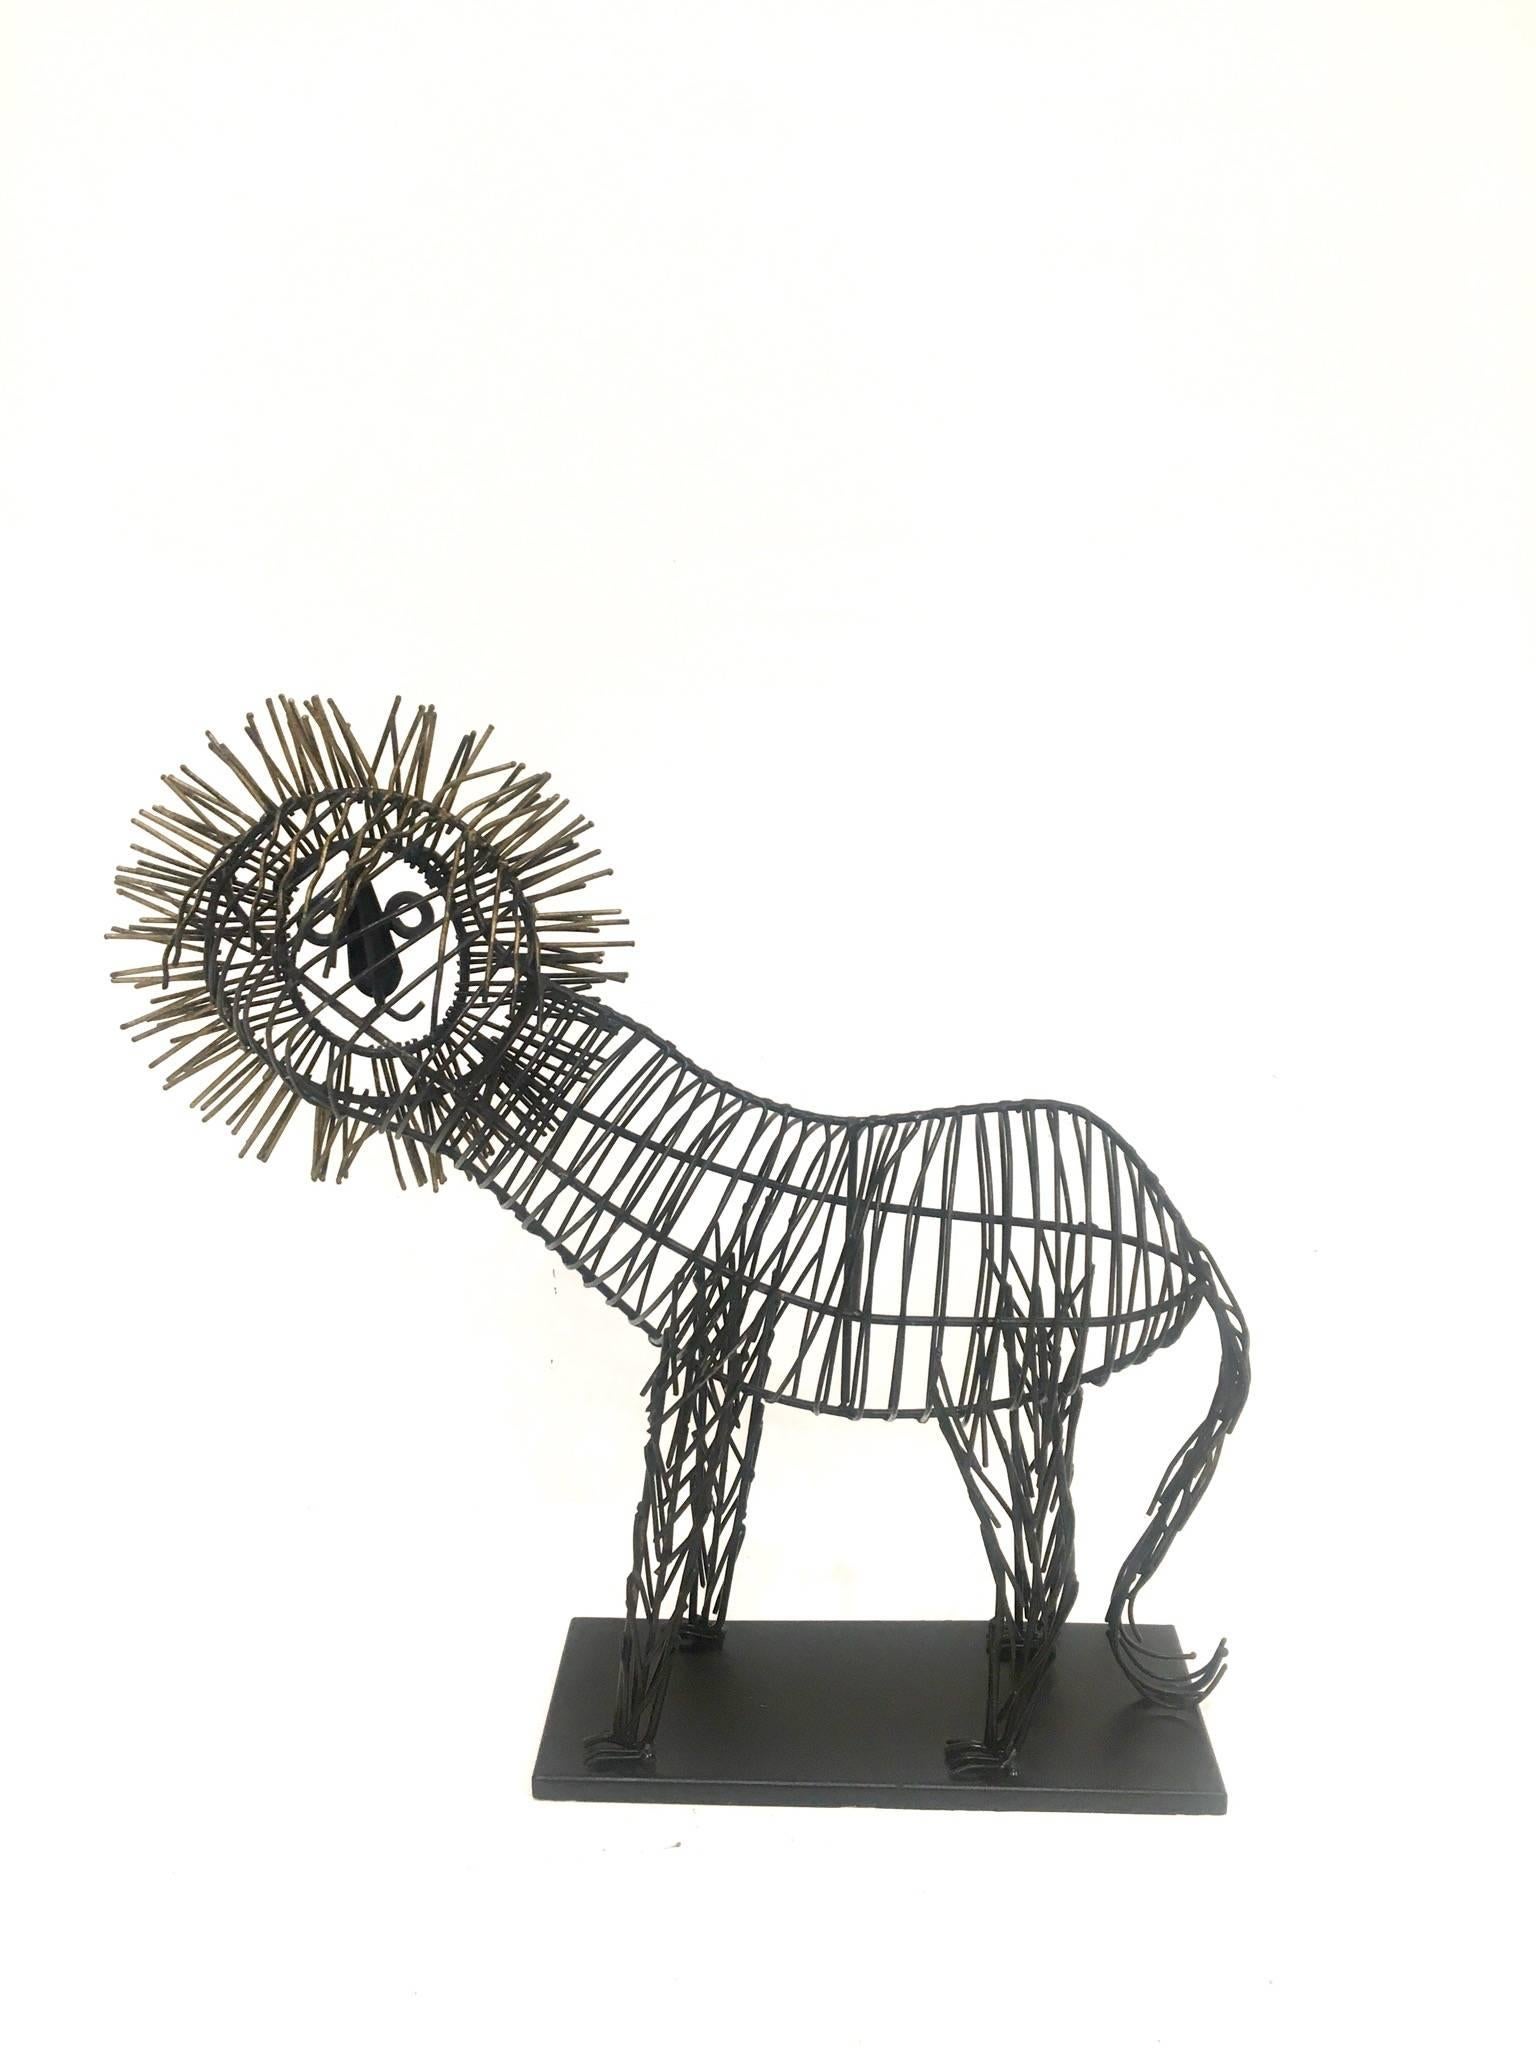 Fun, metal wire sculpture of a male lion sitting on a black metal base. The body is black metal wire and the mane is tinted in gold. The piece is unsigned but in the style of C. Jere, circa 1980s.